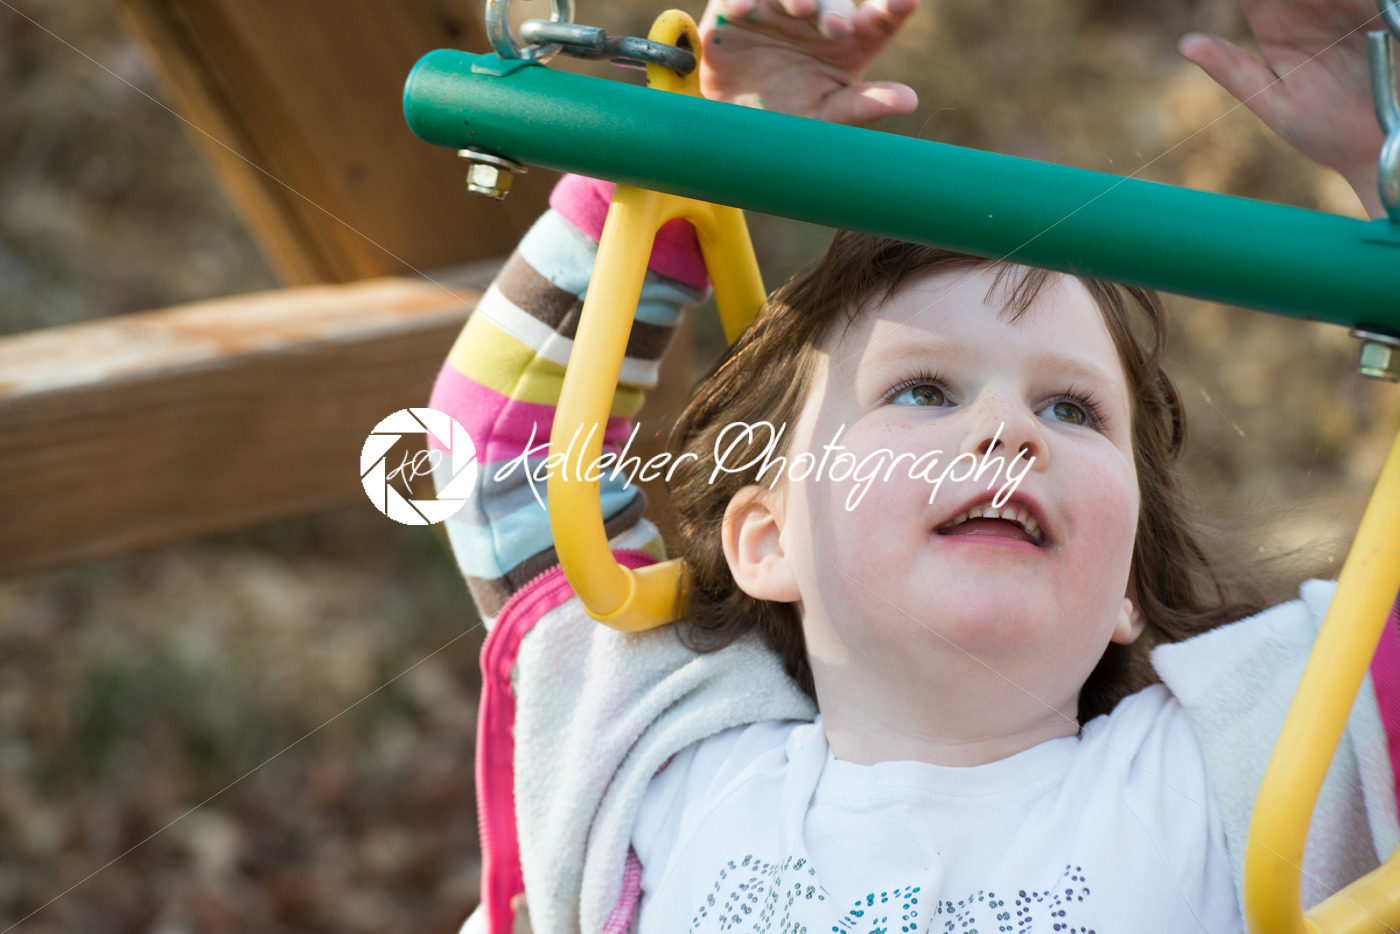 Young girl having fun outside at park on a playground swing set - Kelleher Photography Store